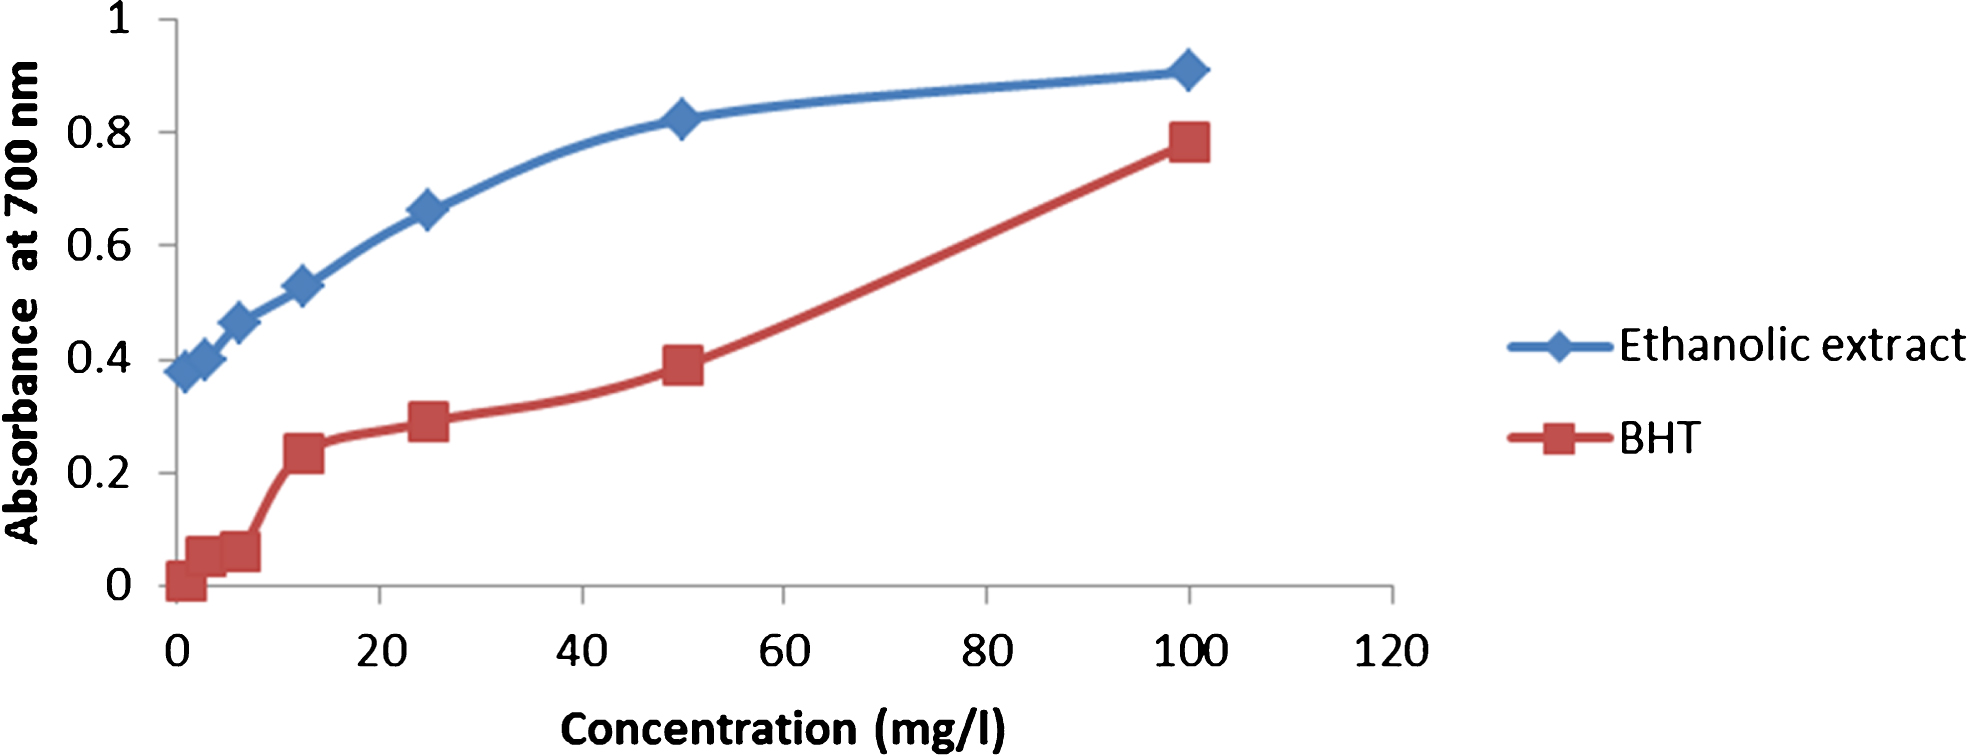 Reduction power of berries ethanolic extract of P. lentiscus compared with that of BHT.